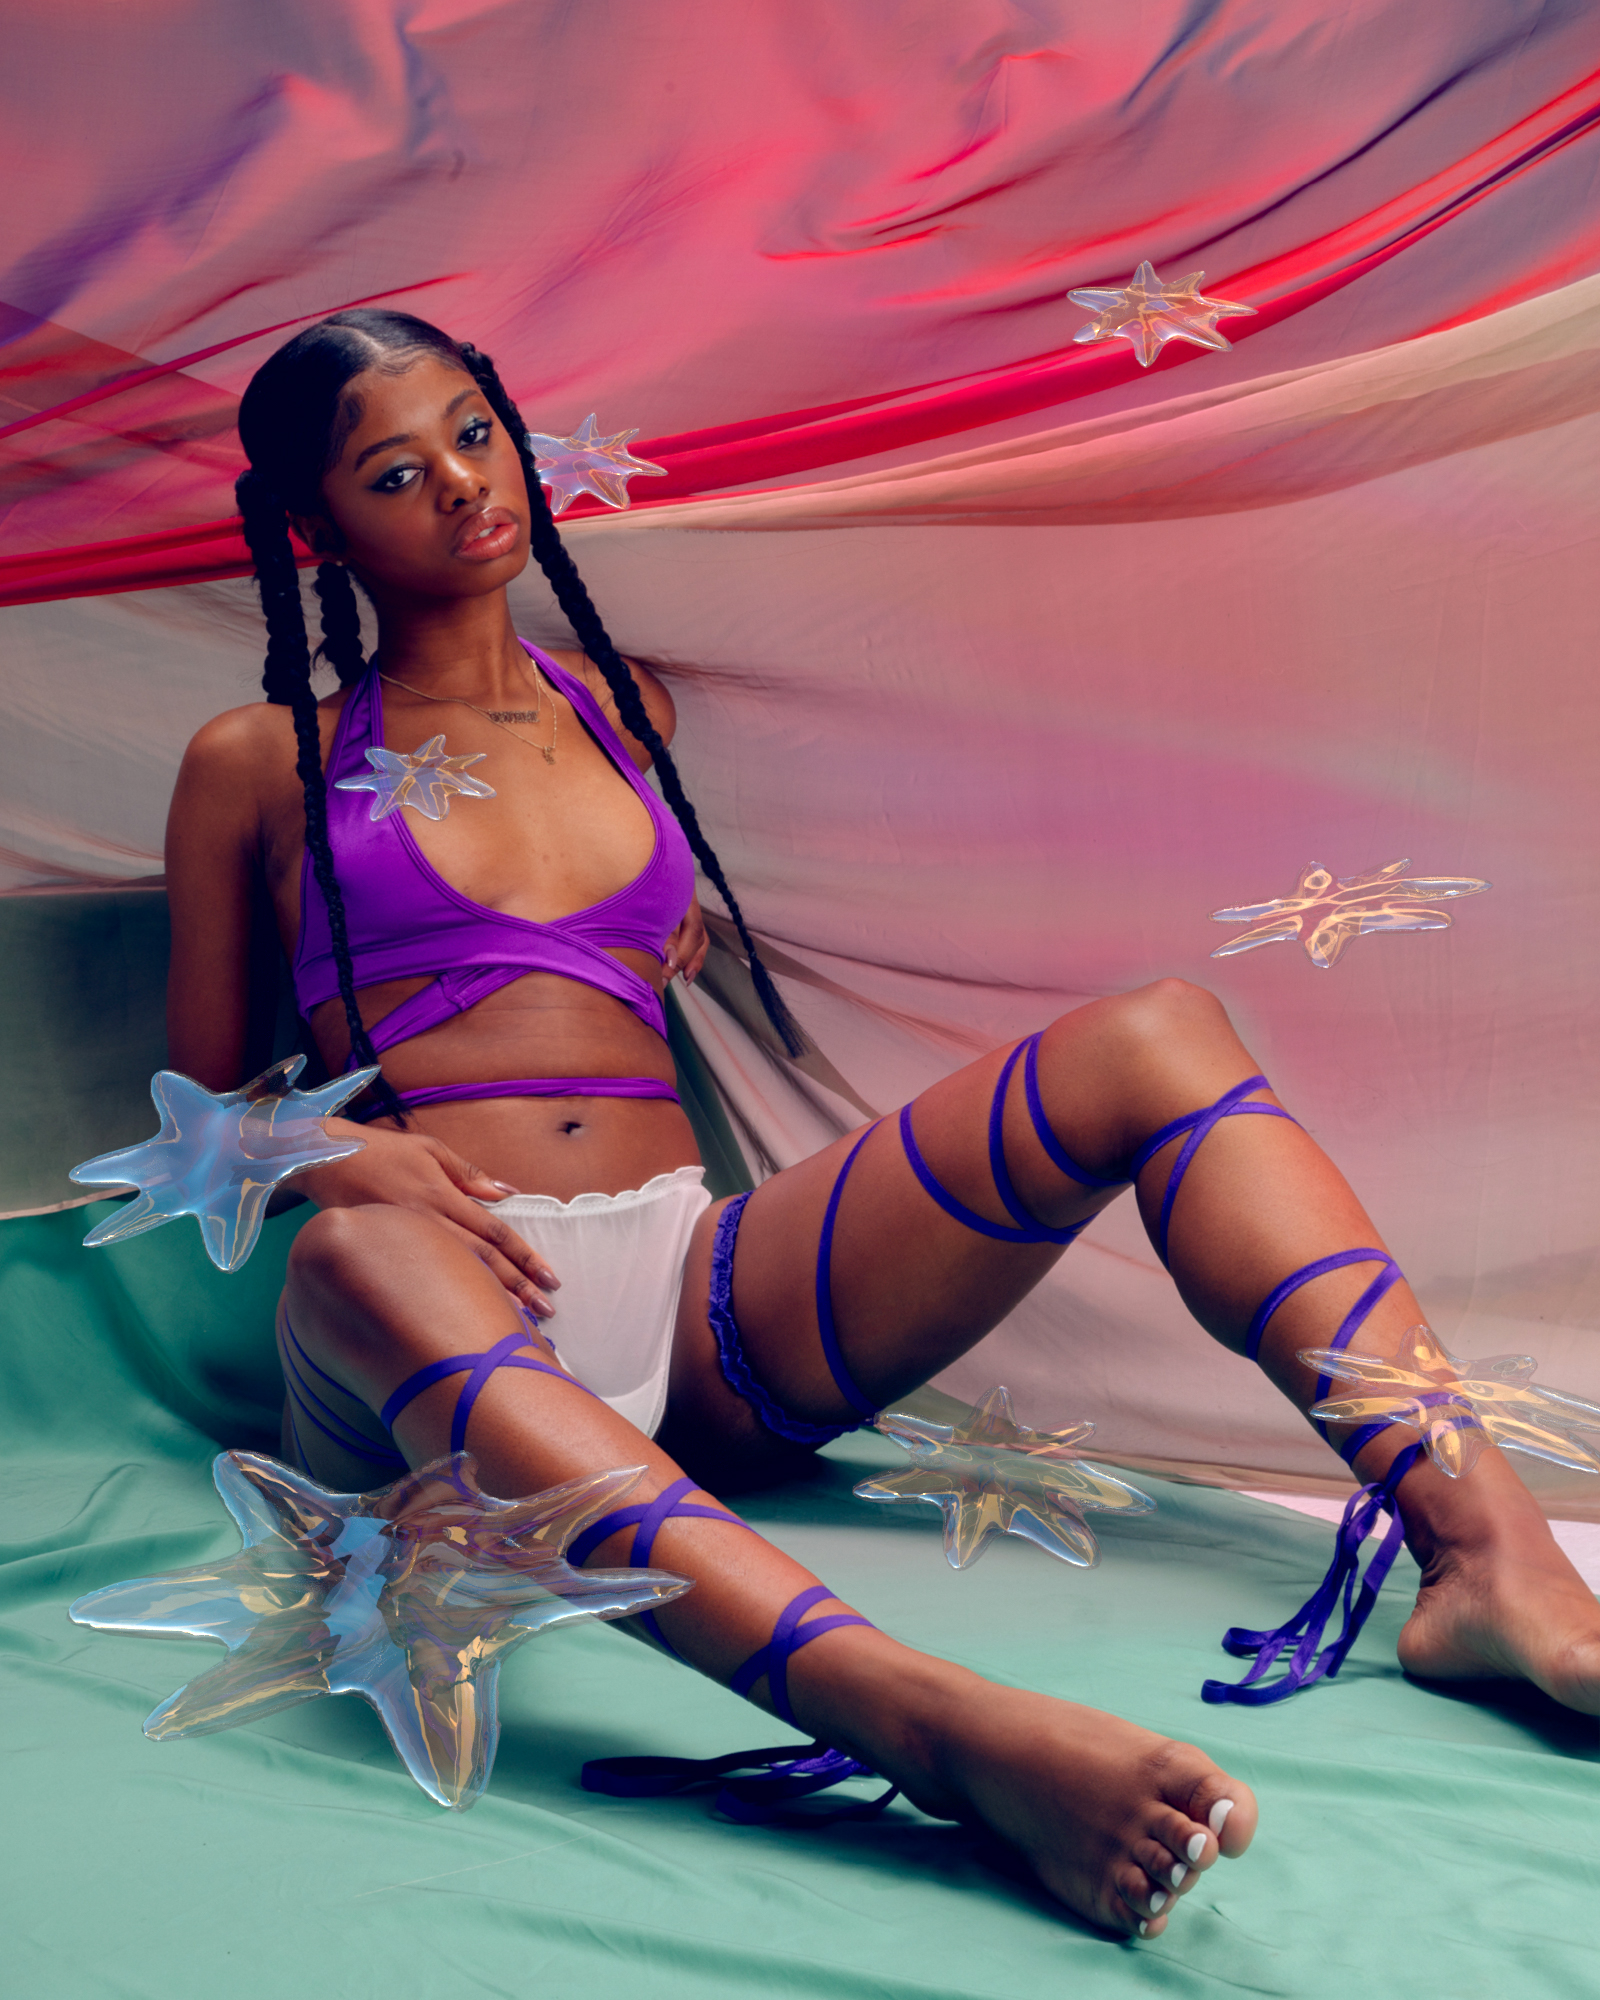 model wearing siren basics white thong and other purple accessories and garments sits in colorful set with stars transposed onto theimage